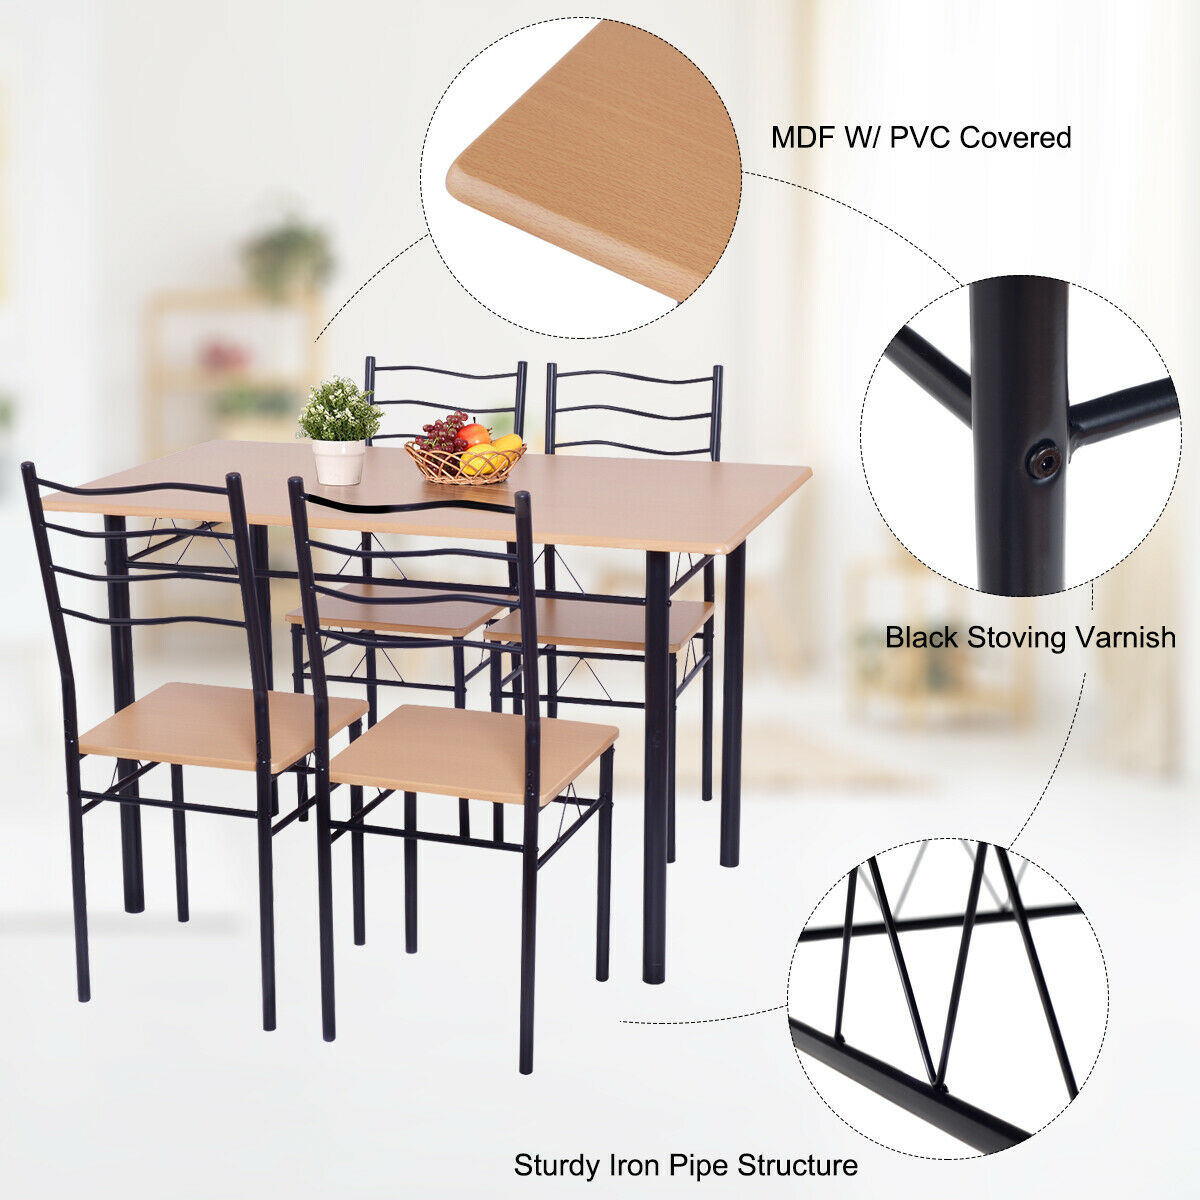 Costway 5 Piece Dining Table Set 29.5" with 4 Chairs Wood Metal Kitchen Breakfast Furniture Brown - image 5 of 8